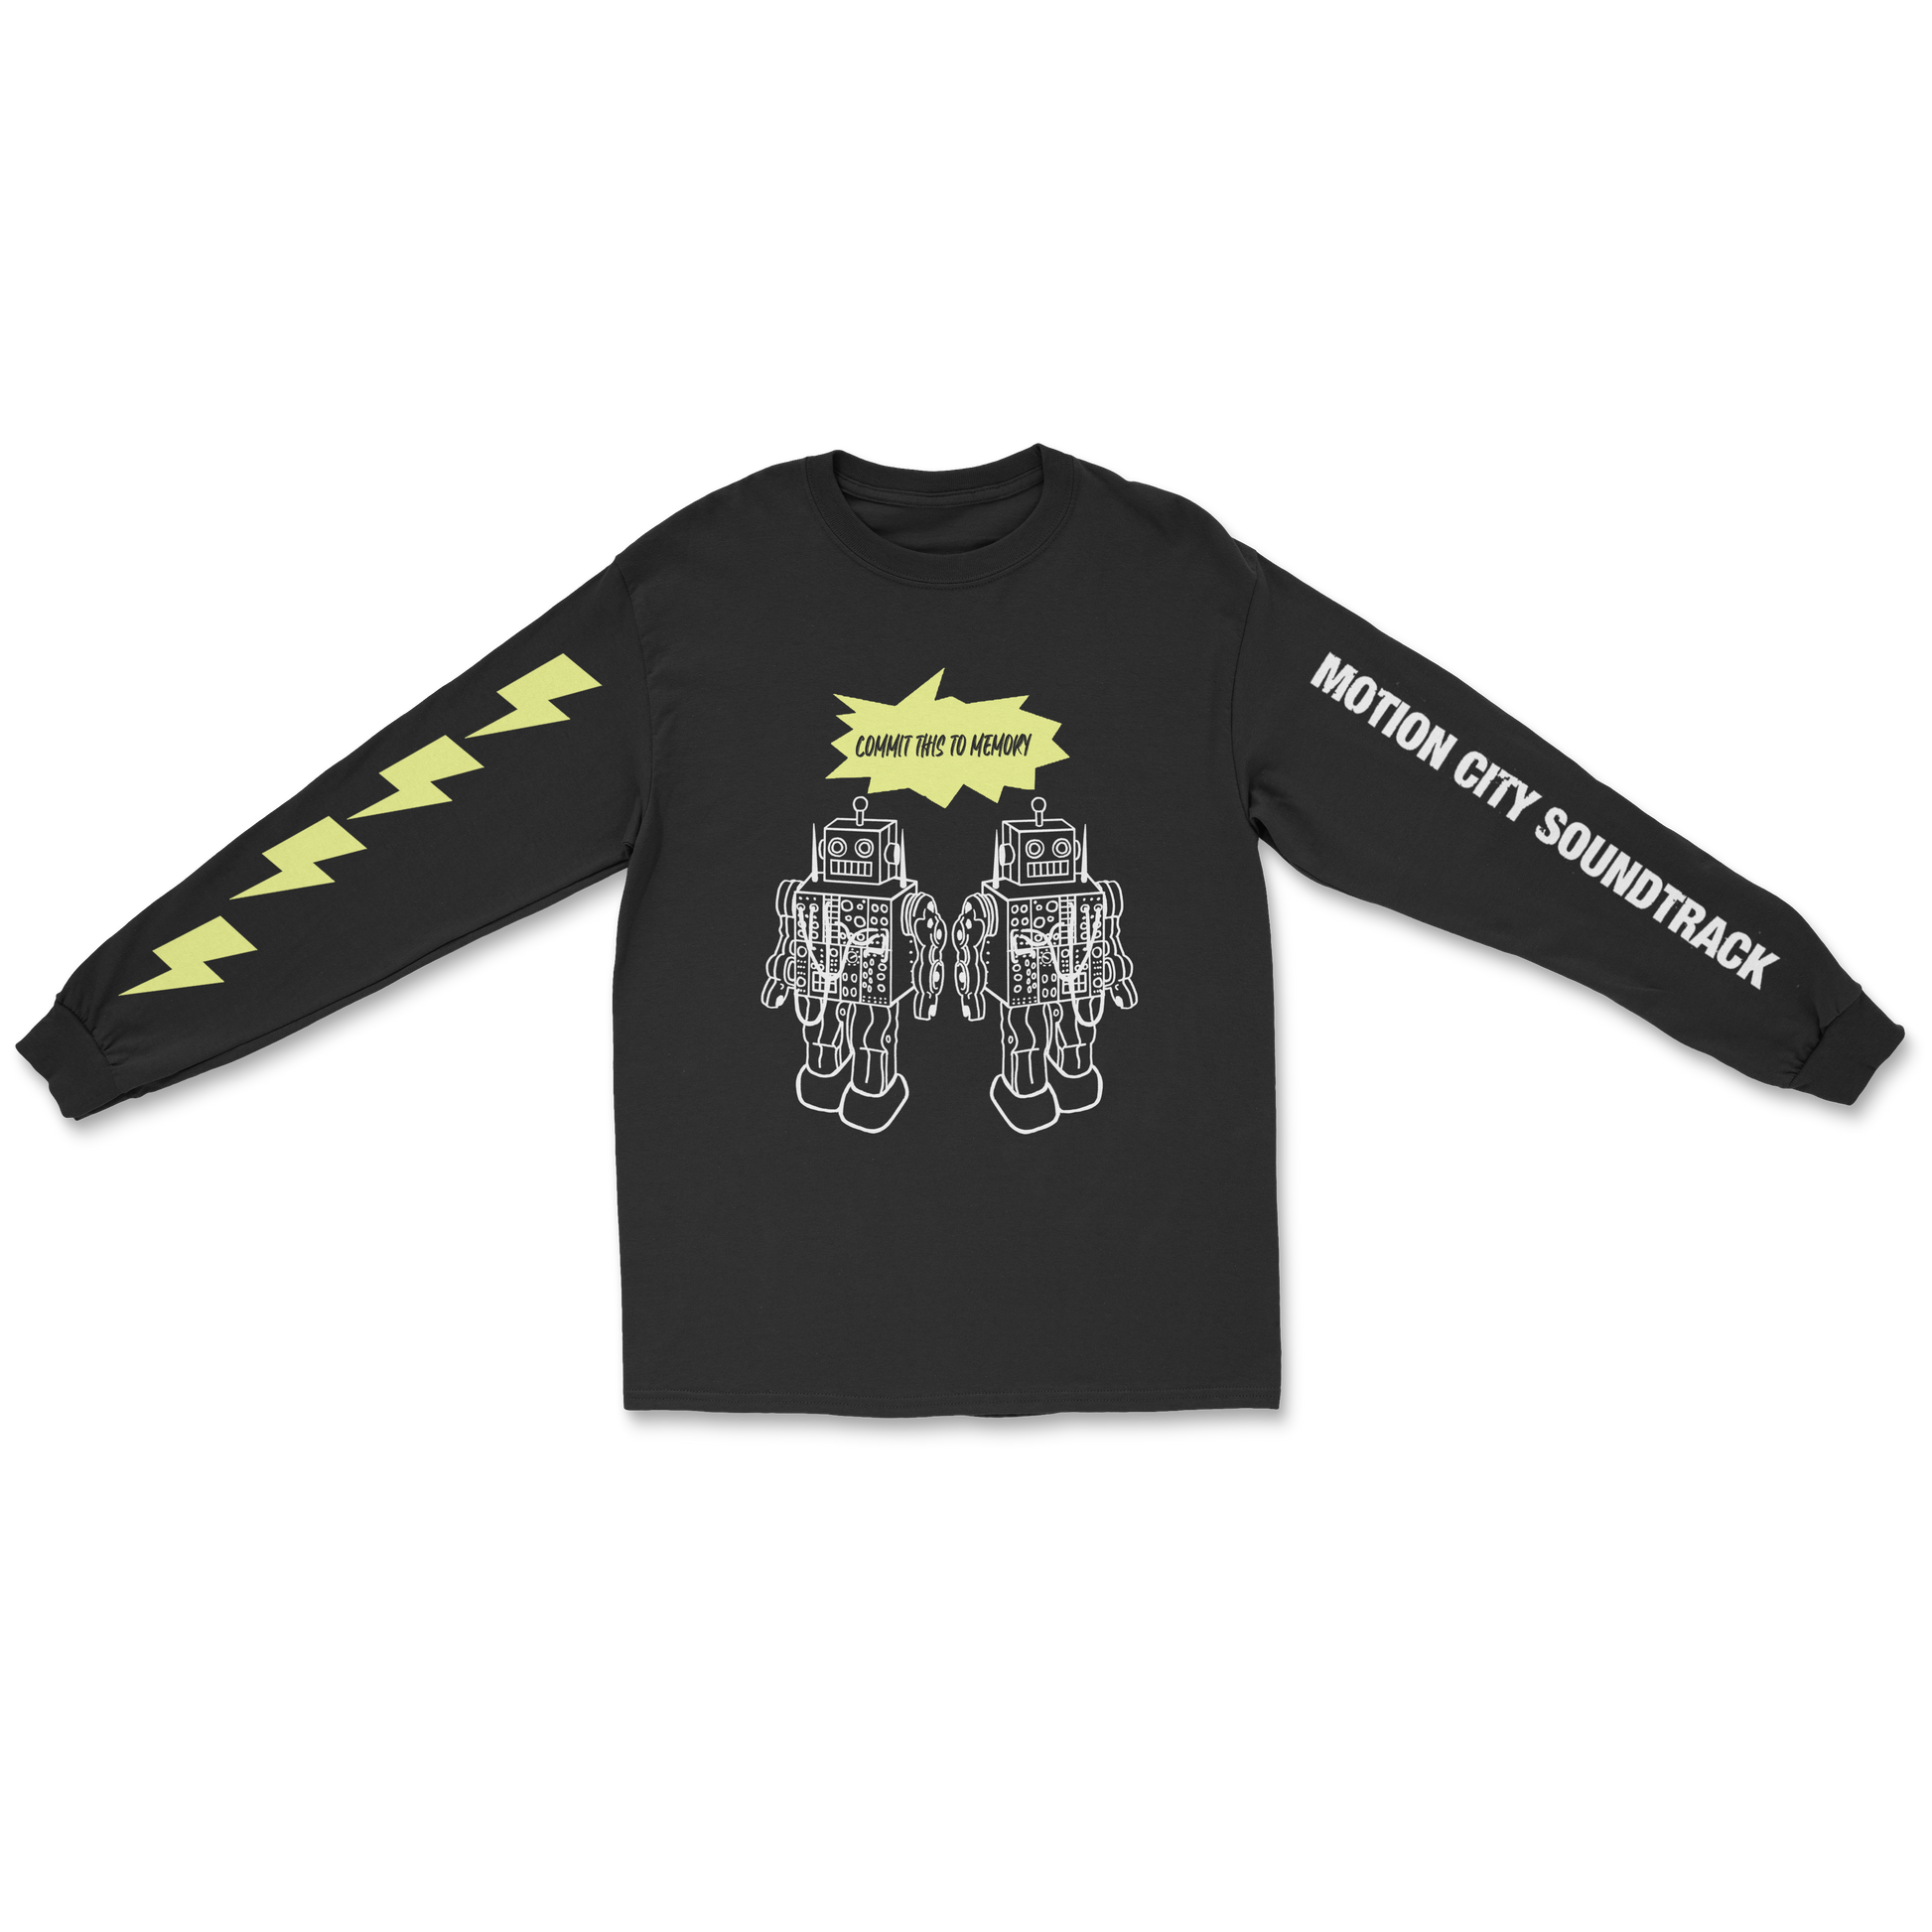 Black longsleeve tee, COMMIT THIS TO MEMORY in black lettering with a yellow background, two white robots graphic, MOTION CITY SOUNDTRACK in bold white lettering down the left sleeve, four yellow lightning bolts down the right sleeve. 